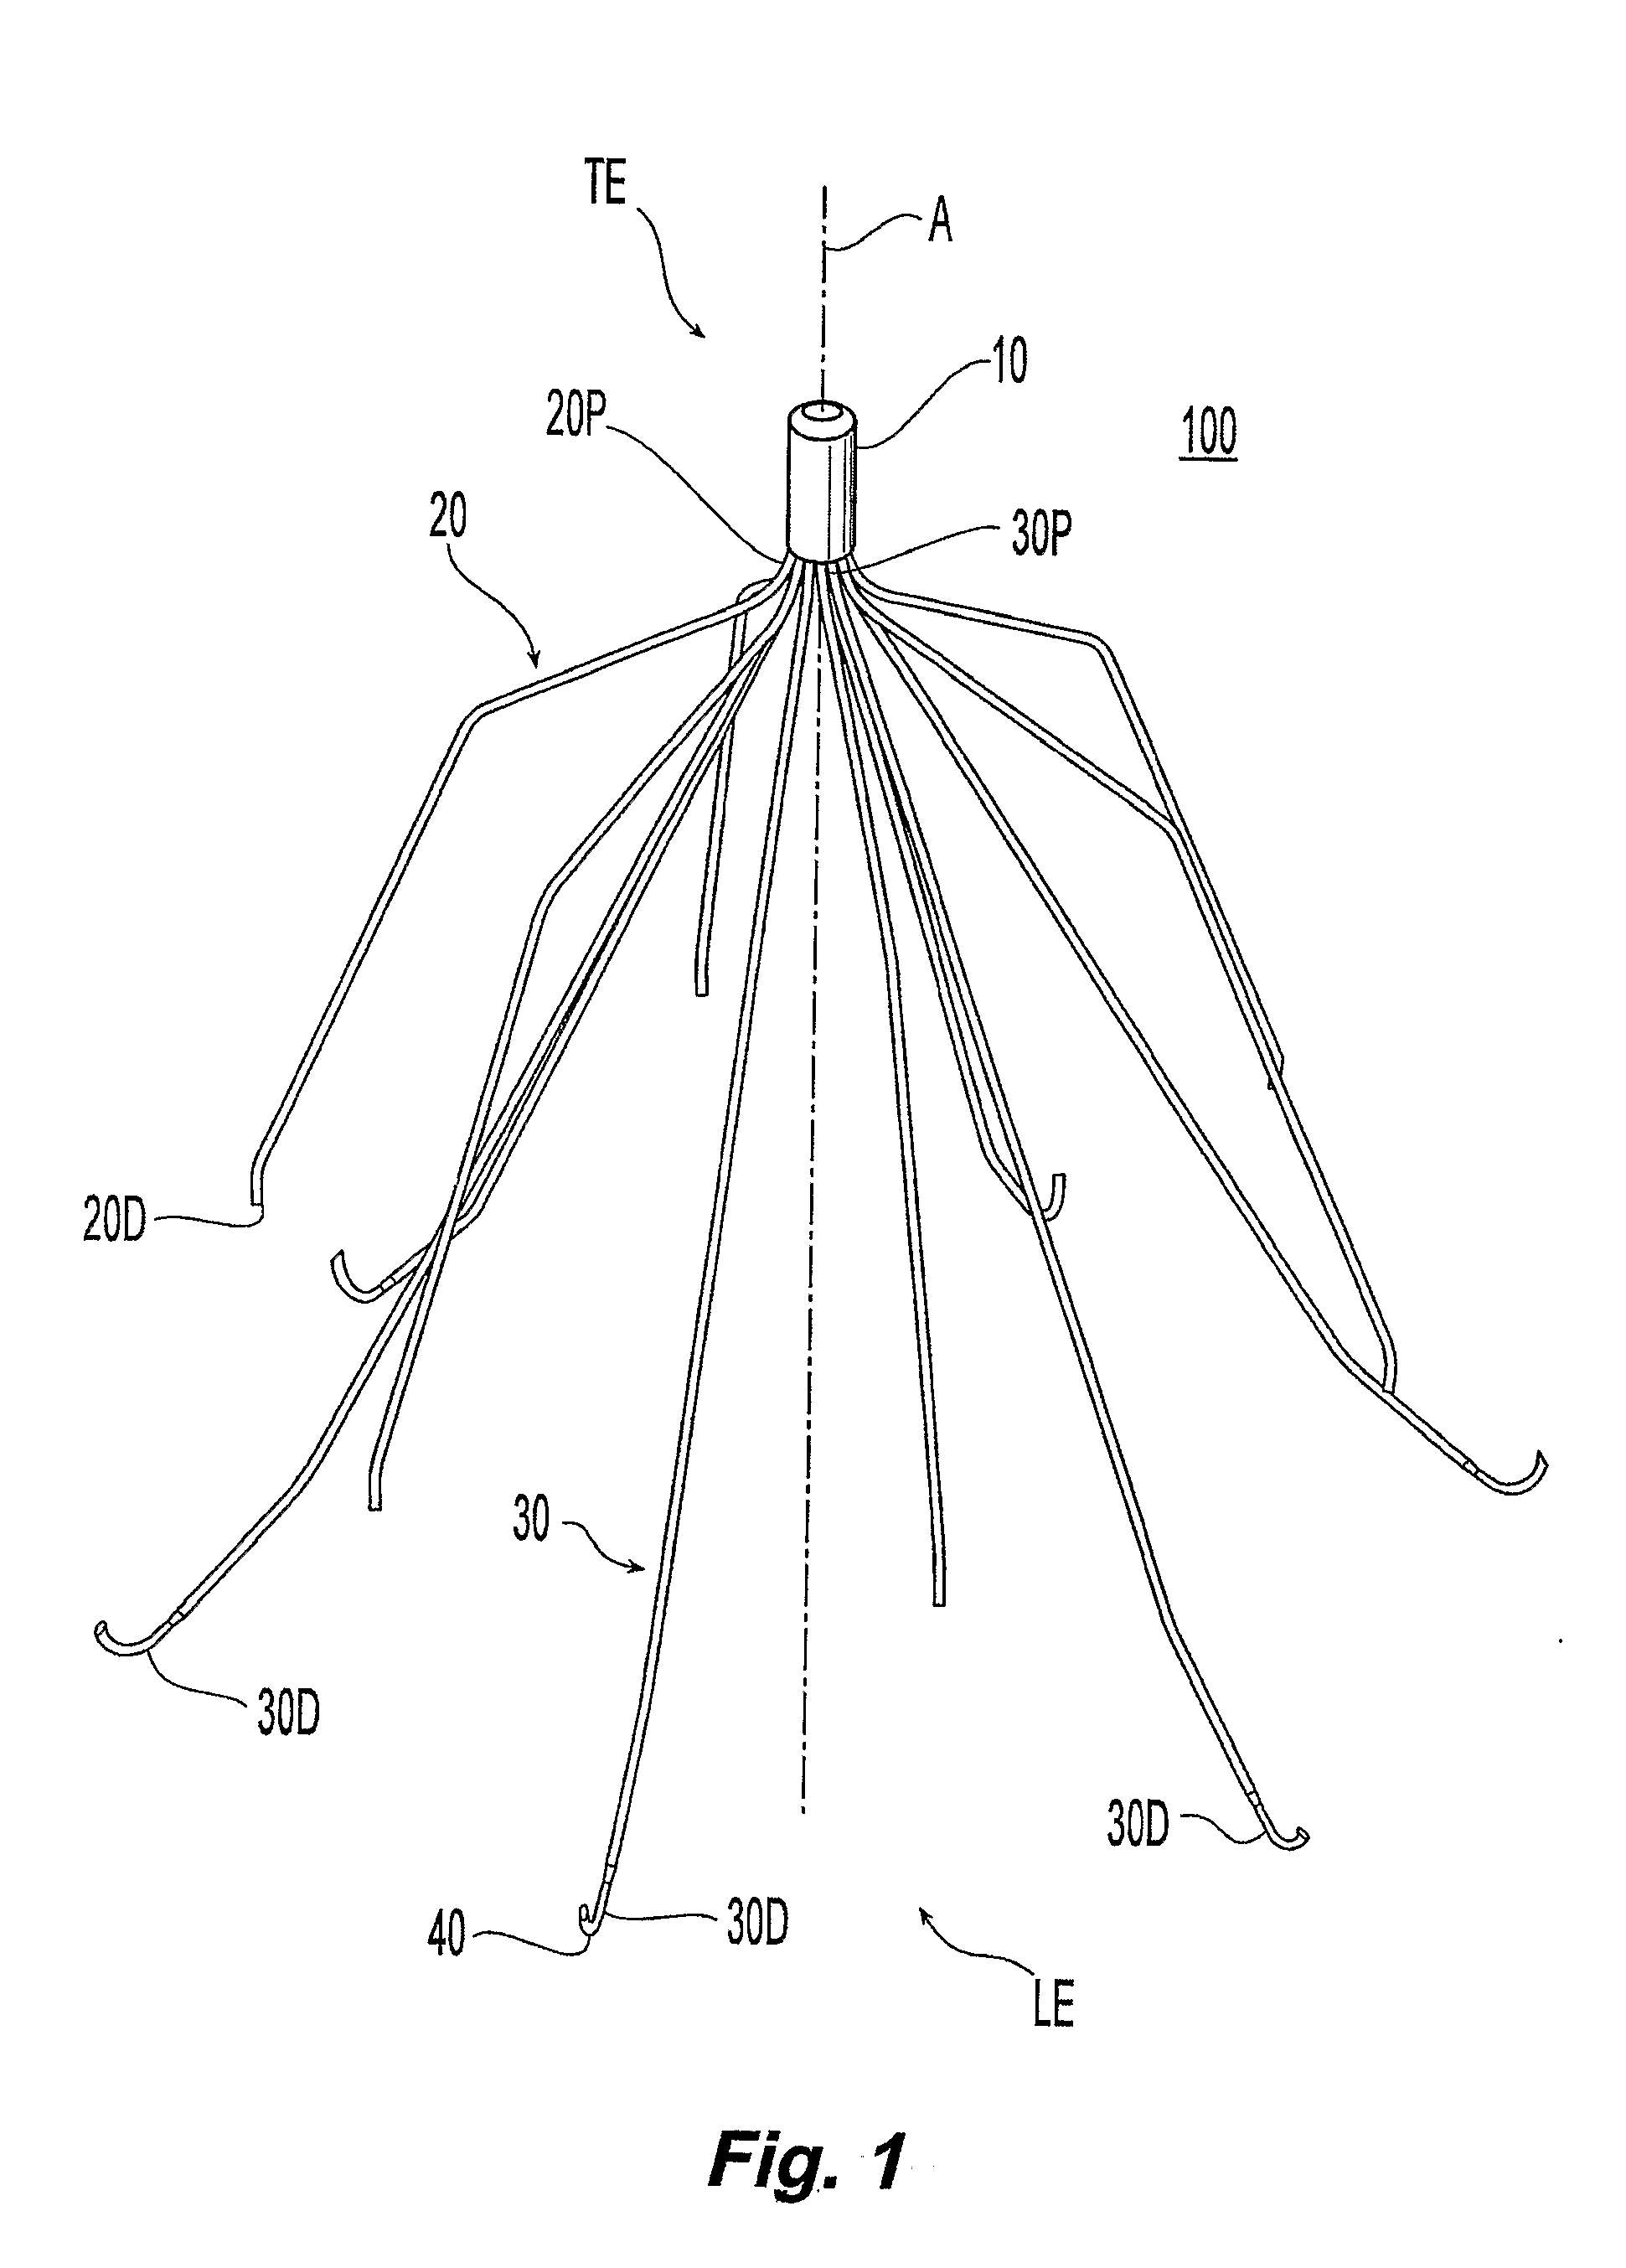 Removable blood clot filter with edge for cutting through the endothelium